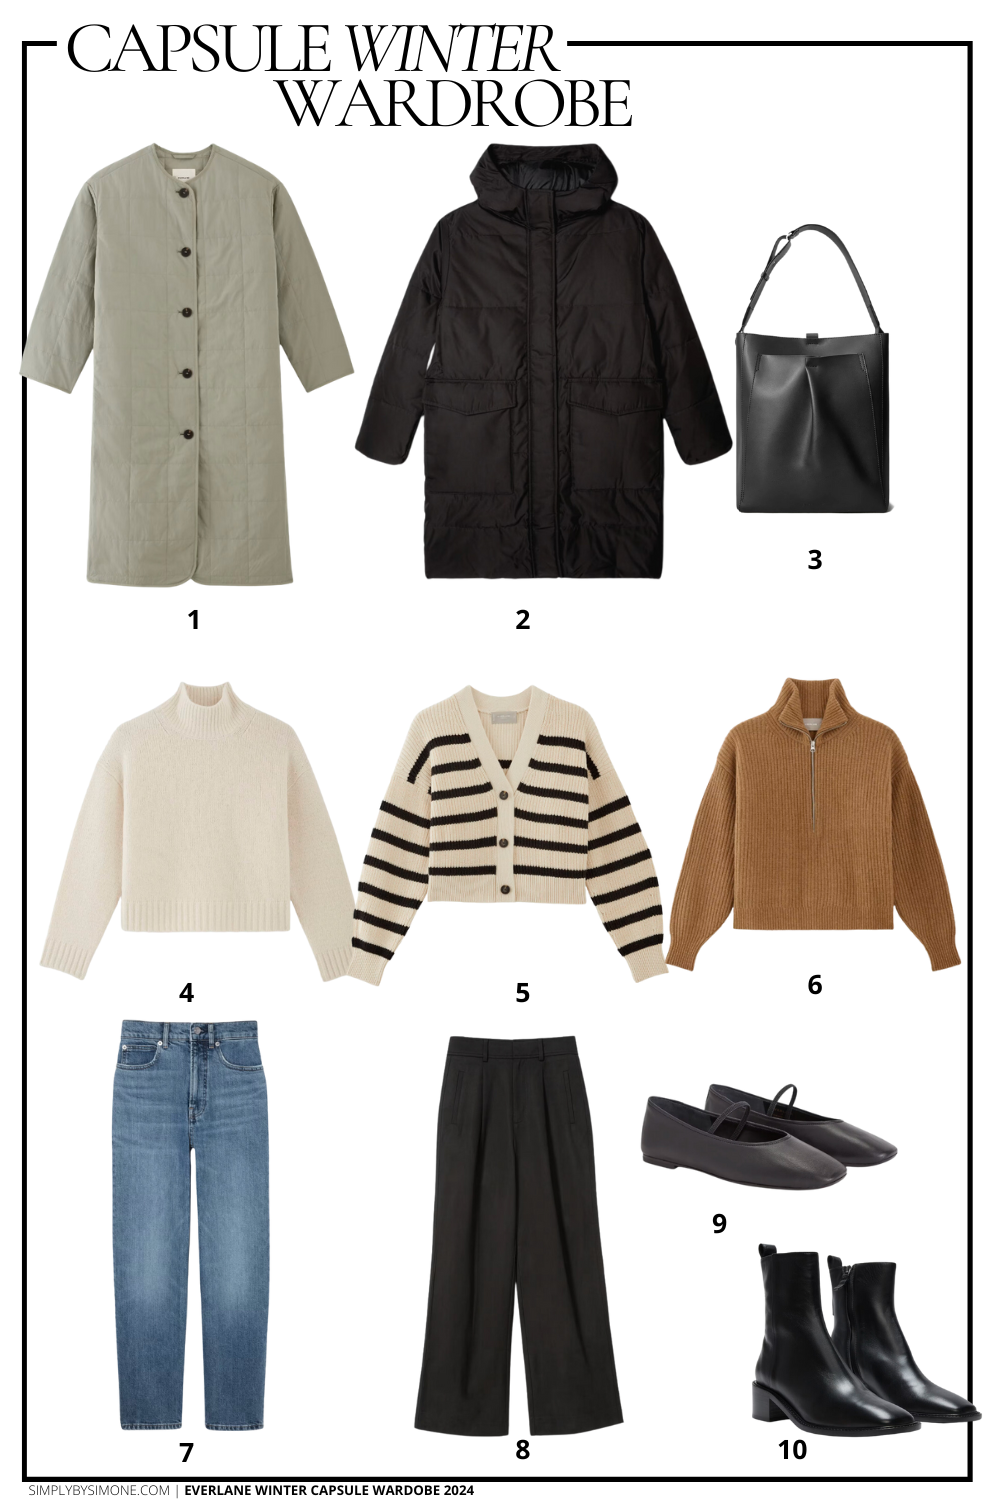 10 Winter Capsule Wardrobe Pieces to Add to Cart - PureWow